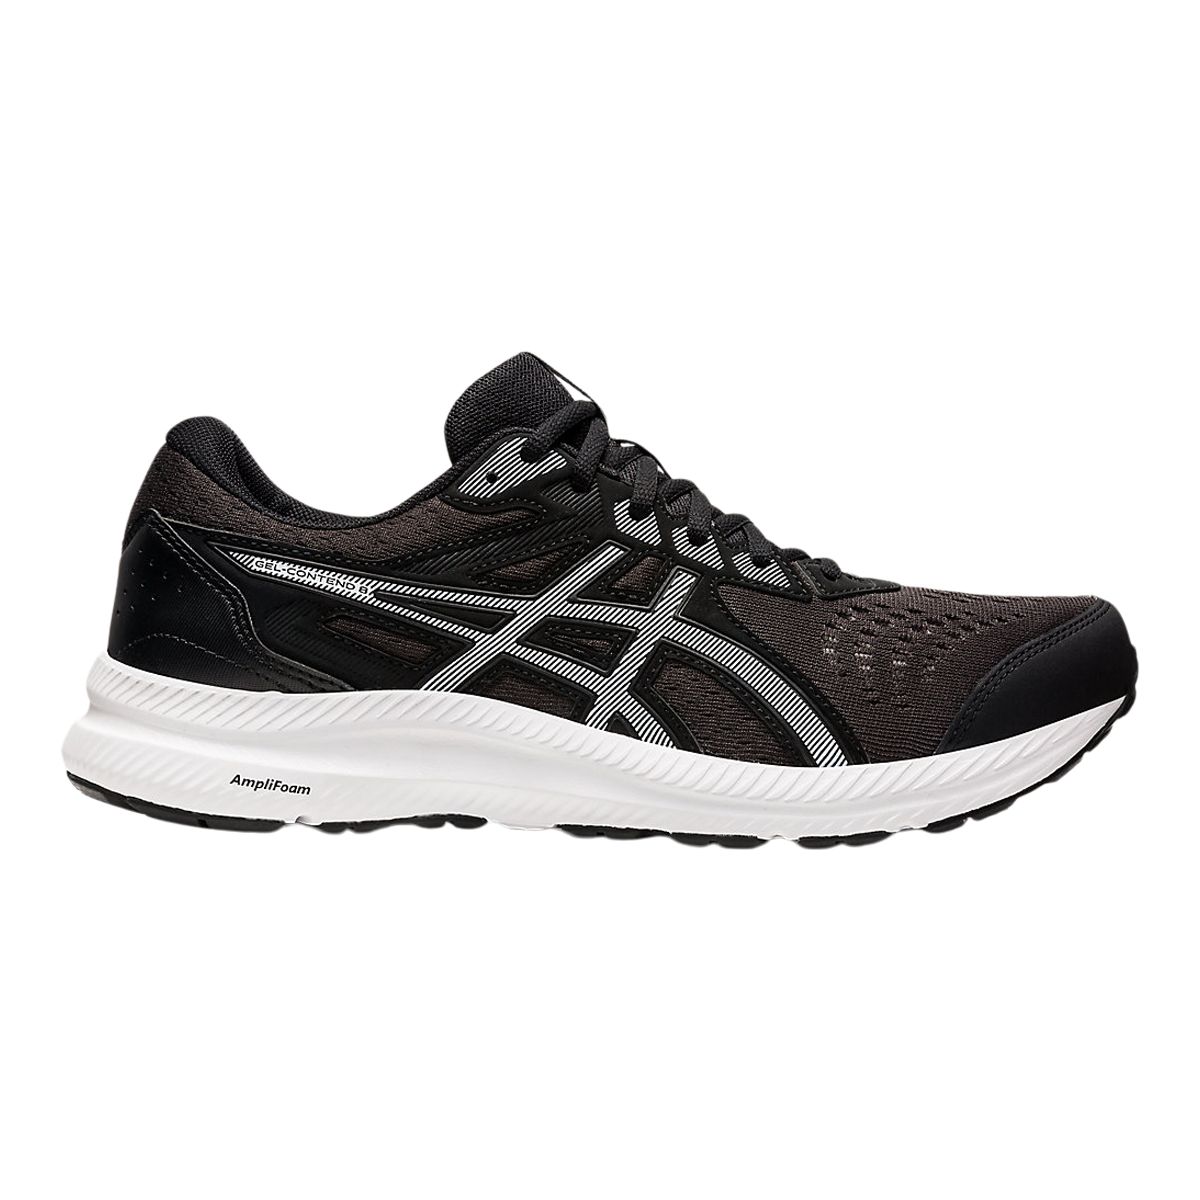 Image of Asics Men's Gel Contend 8 Extra Wide Training Shoes